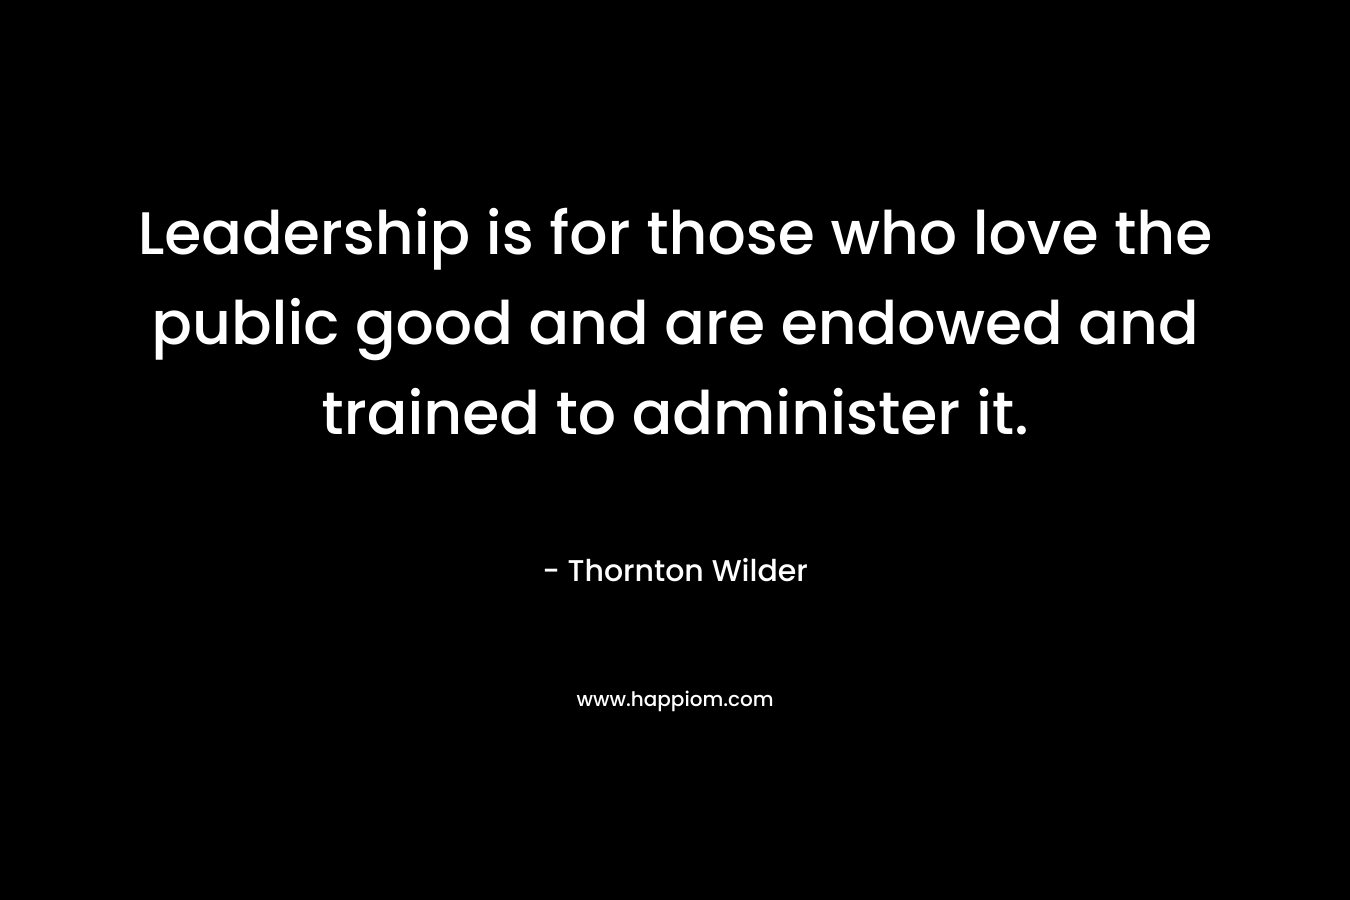 Leadership is for those who love the public good and are endowed and trained to administer it.